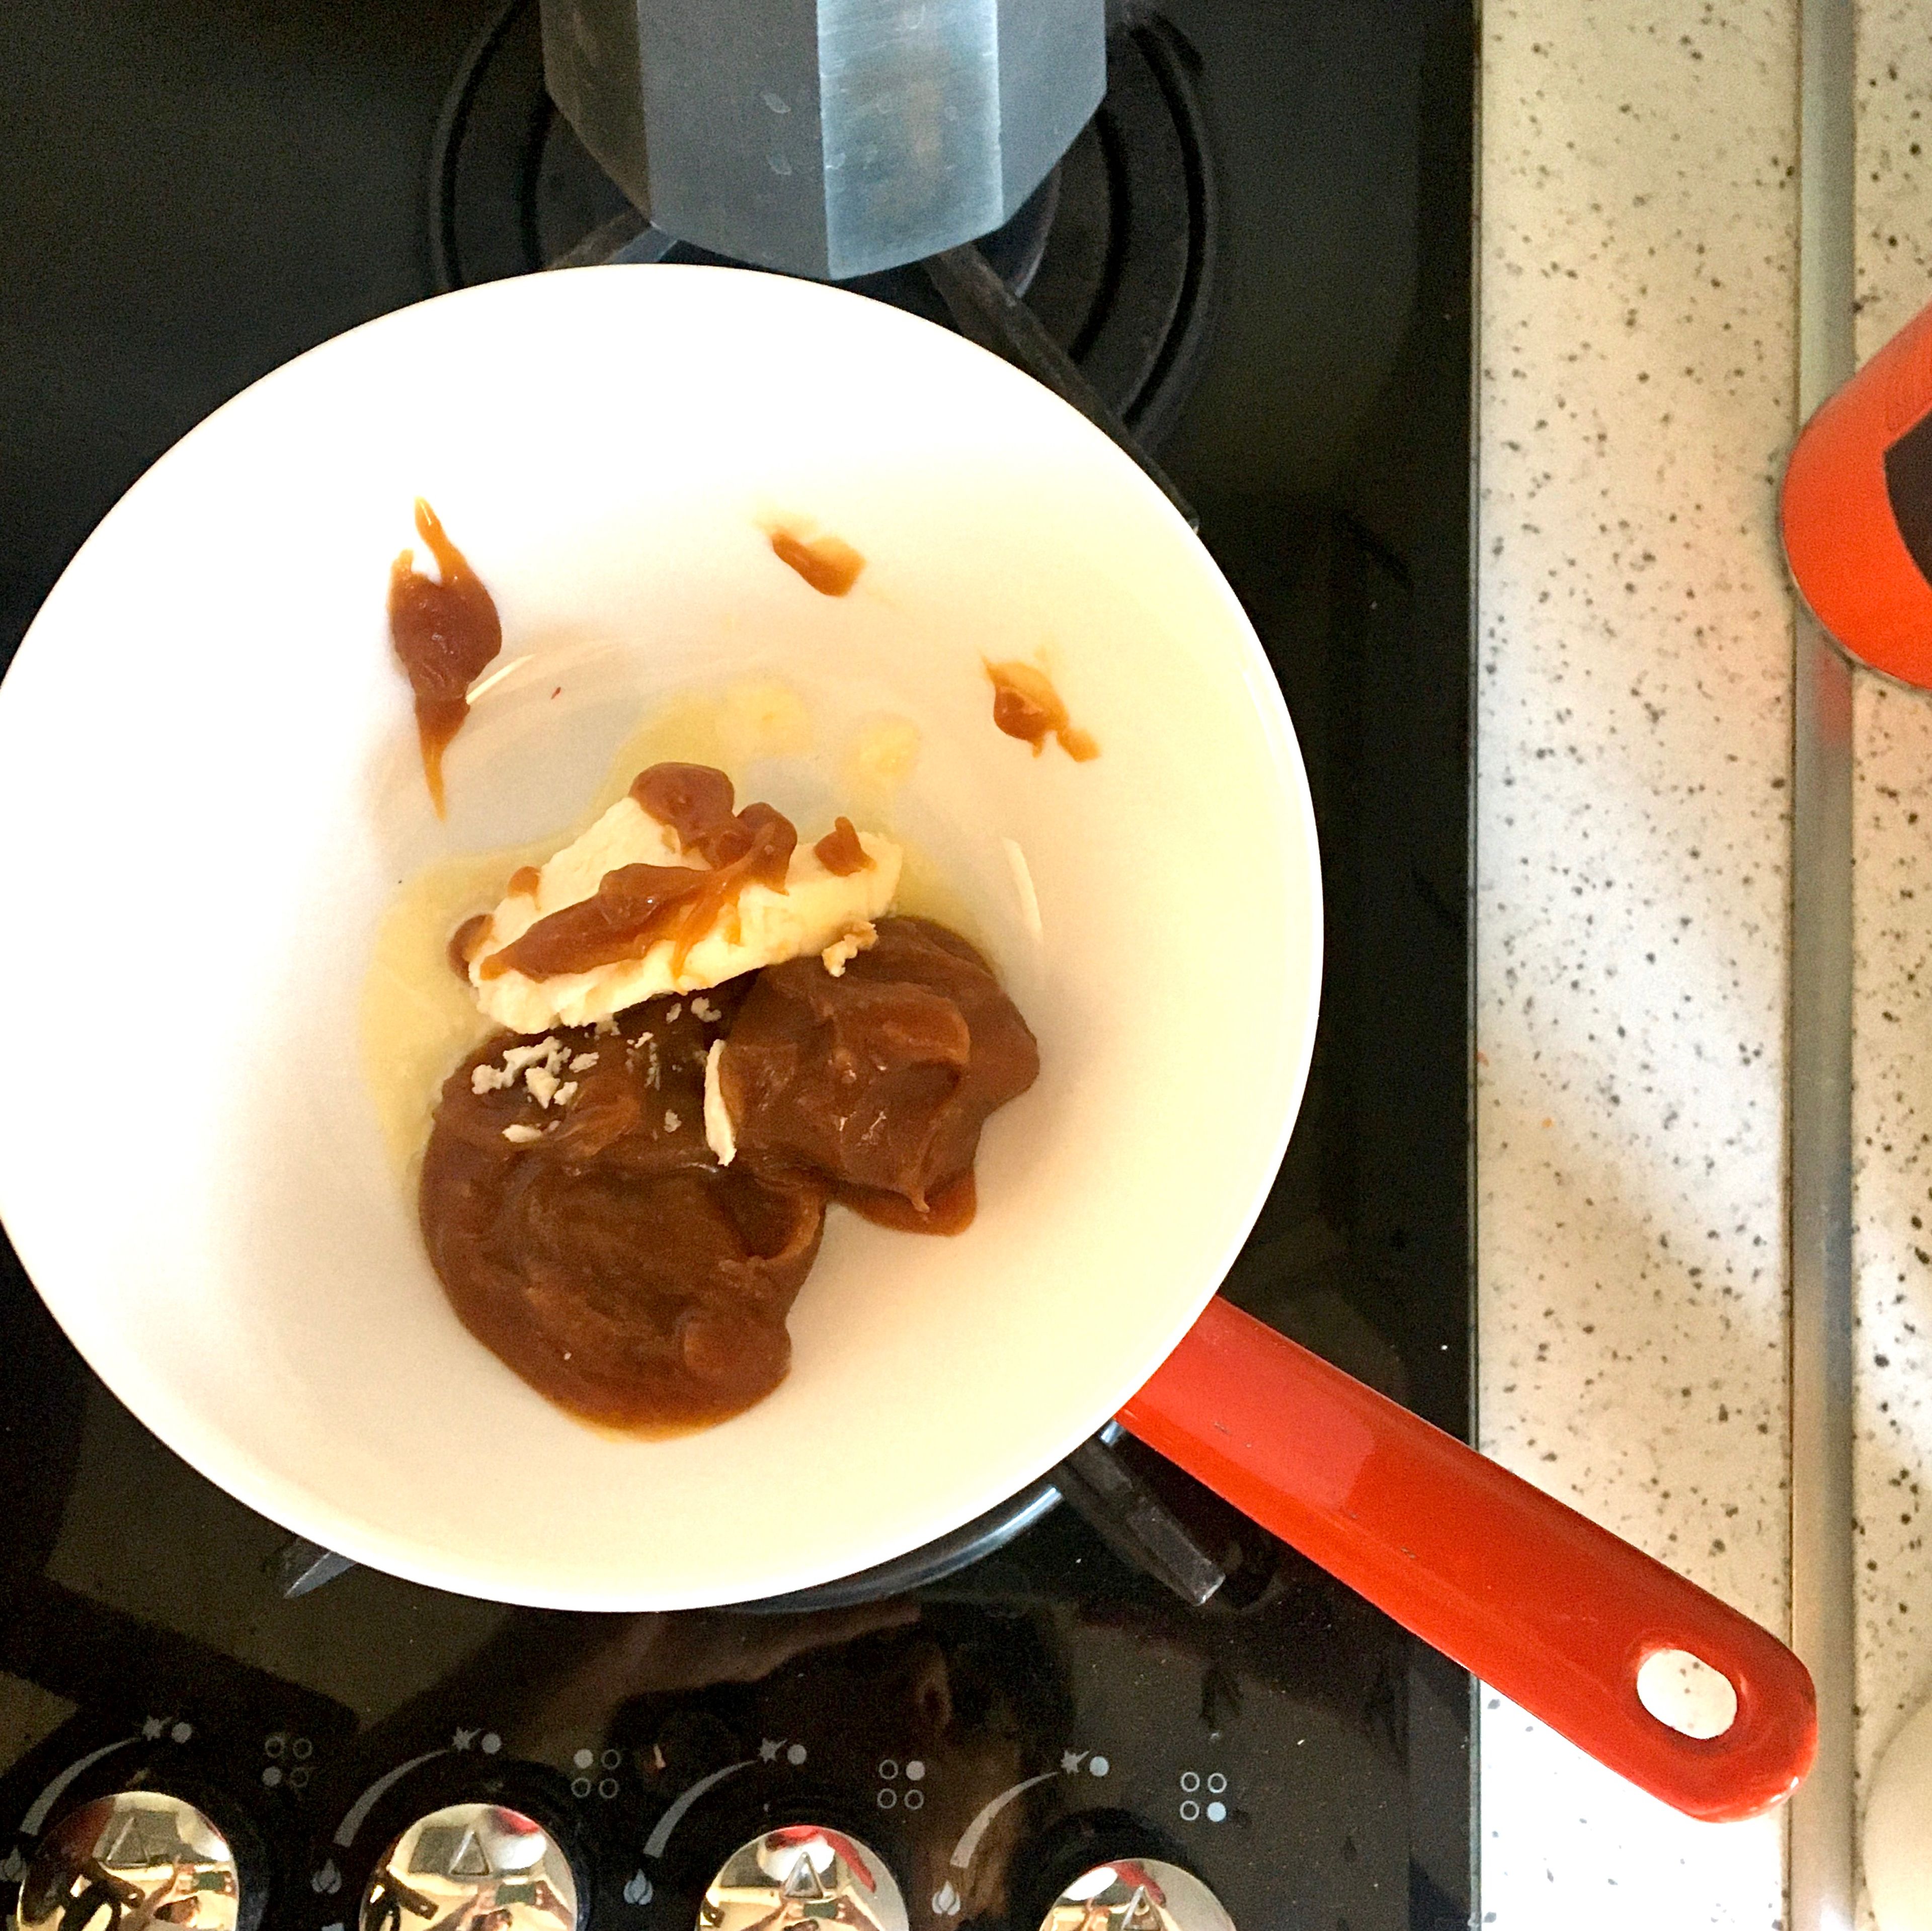 Add the butter and caramel to a small bowl set over a pot of simmering water. Remove from the heat as they start melting. Chop the chocolate, reserve a tbsp for decoration, add the rest along with the cocoa powder to the bowl. Stir until smooth.